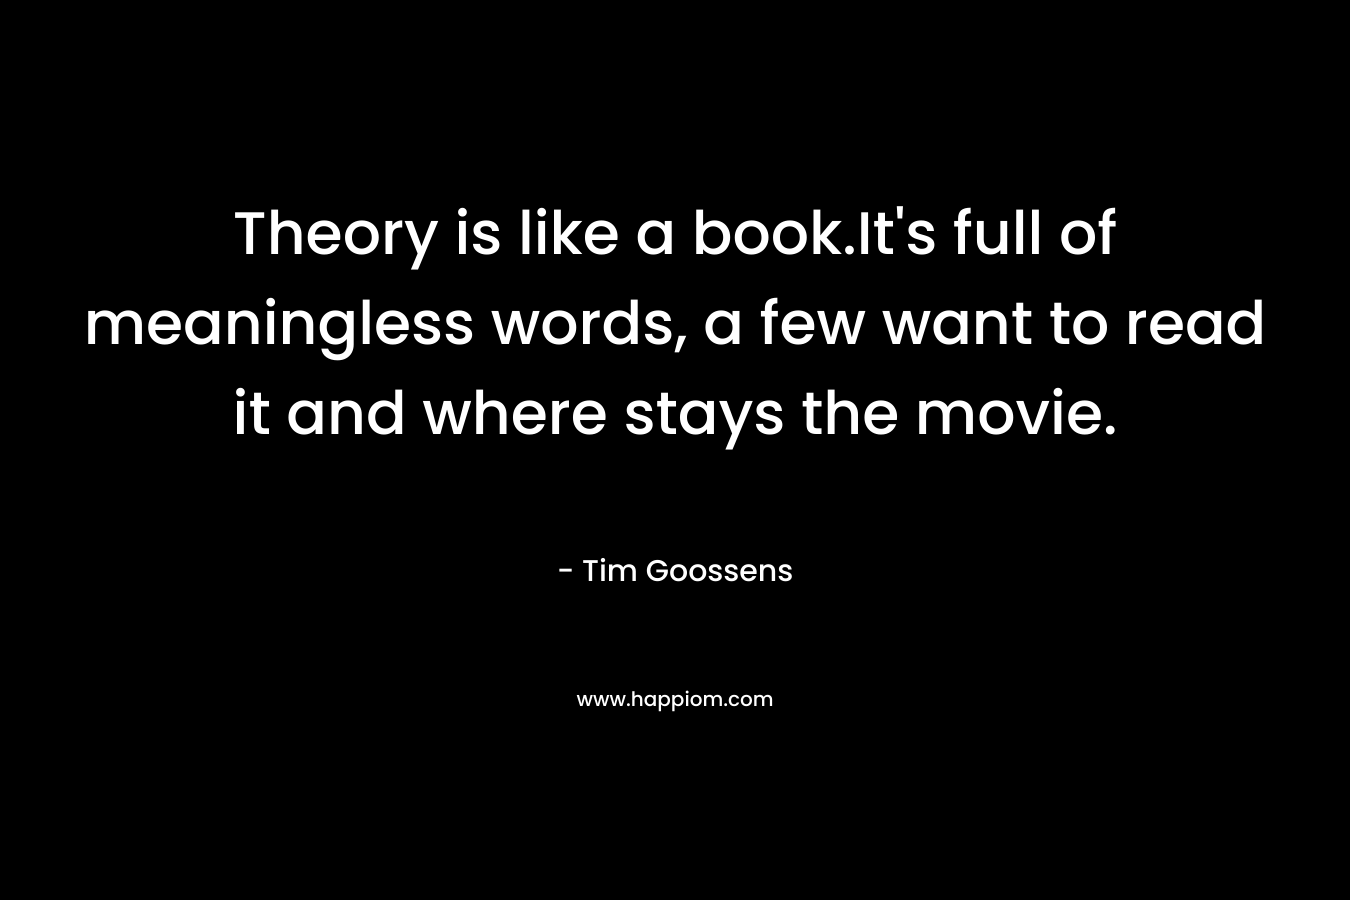 Theory is like a book.It's full of meaningless words, a few want to read it and where stays the movie.